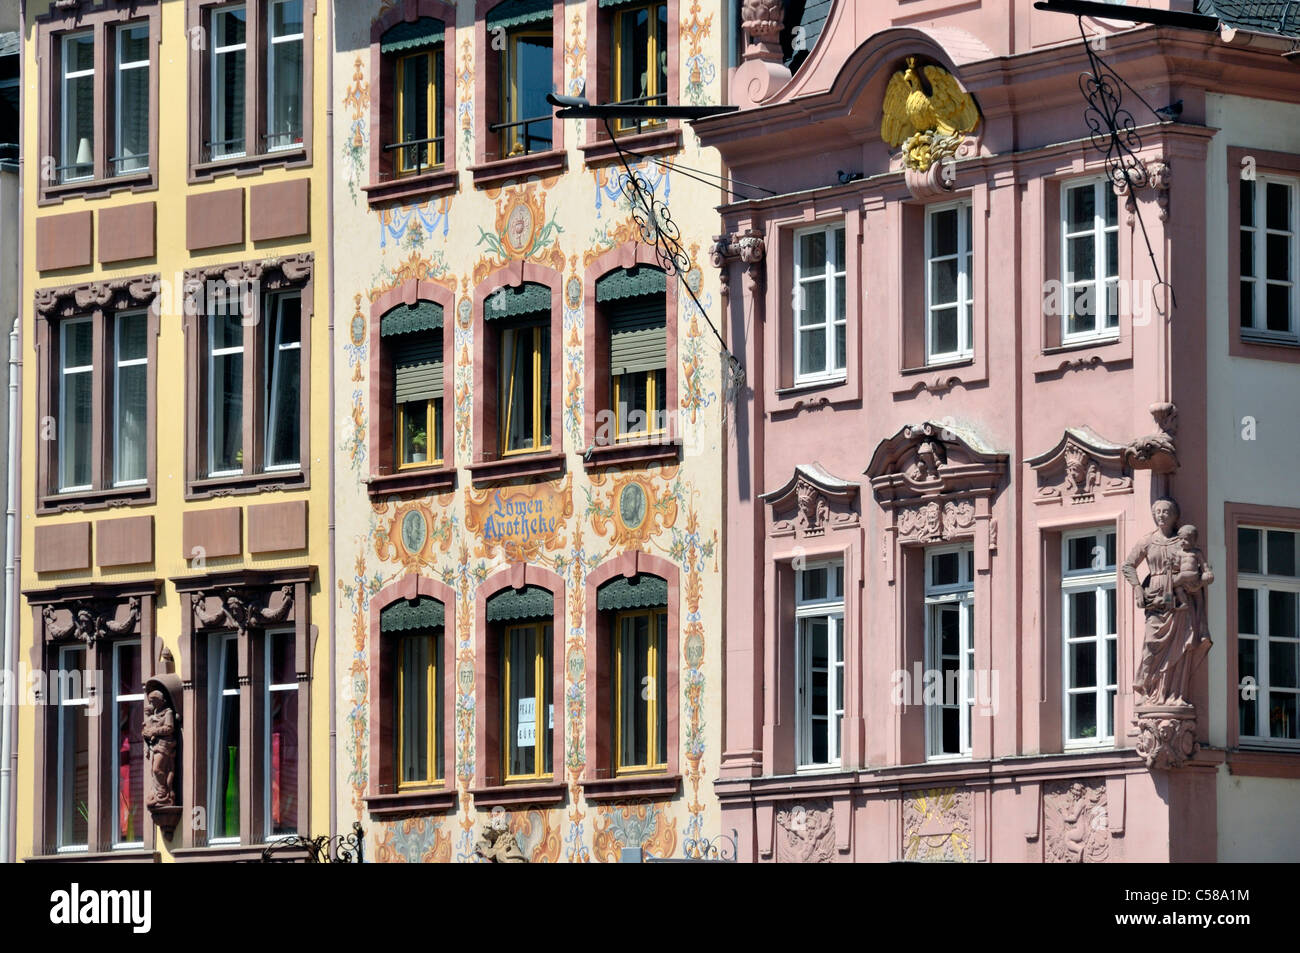 Lion's drugstore, building, construction, facade, paints, cathedral, dome, Mainz, Rhineland-Palatinate, Germany, Europe Stock Photo